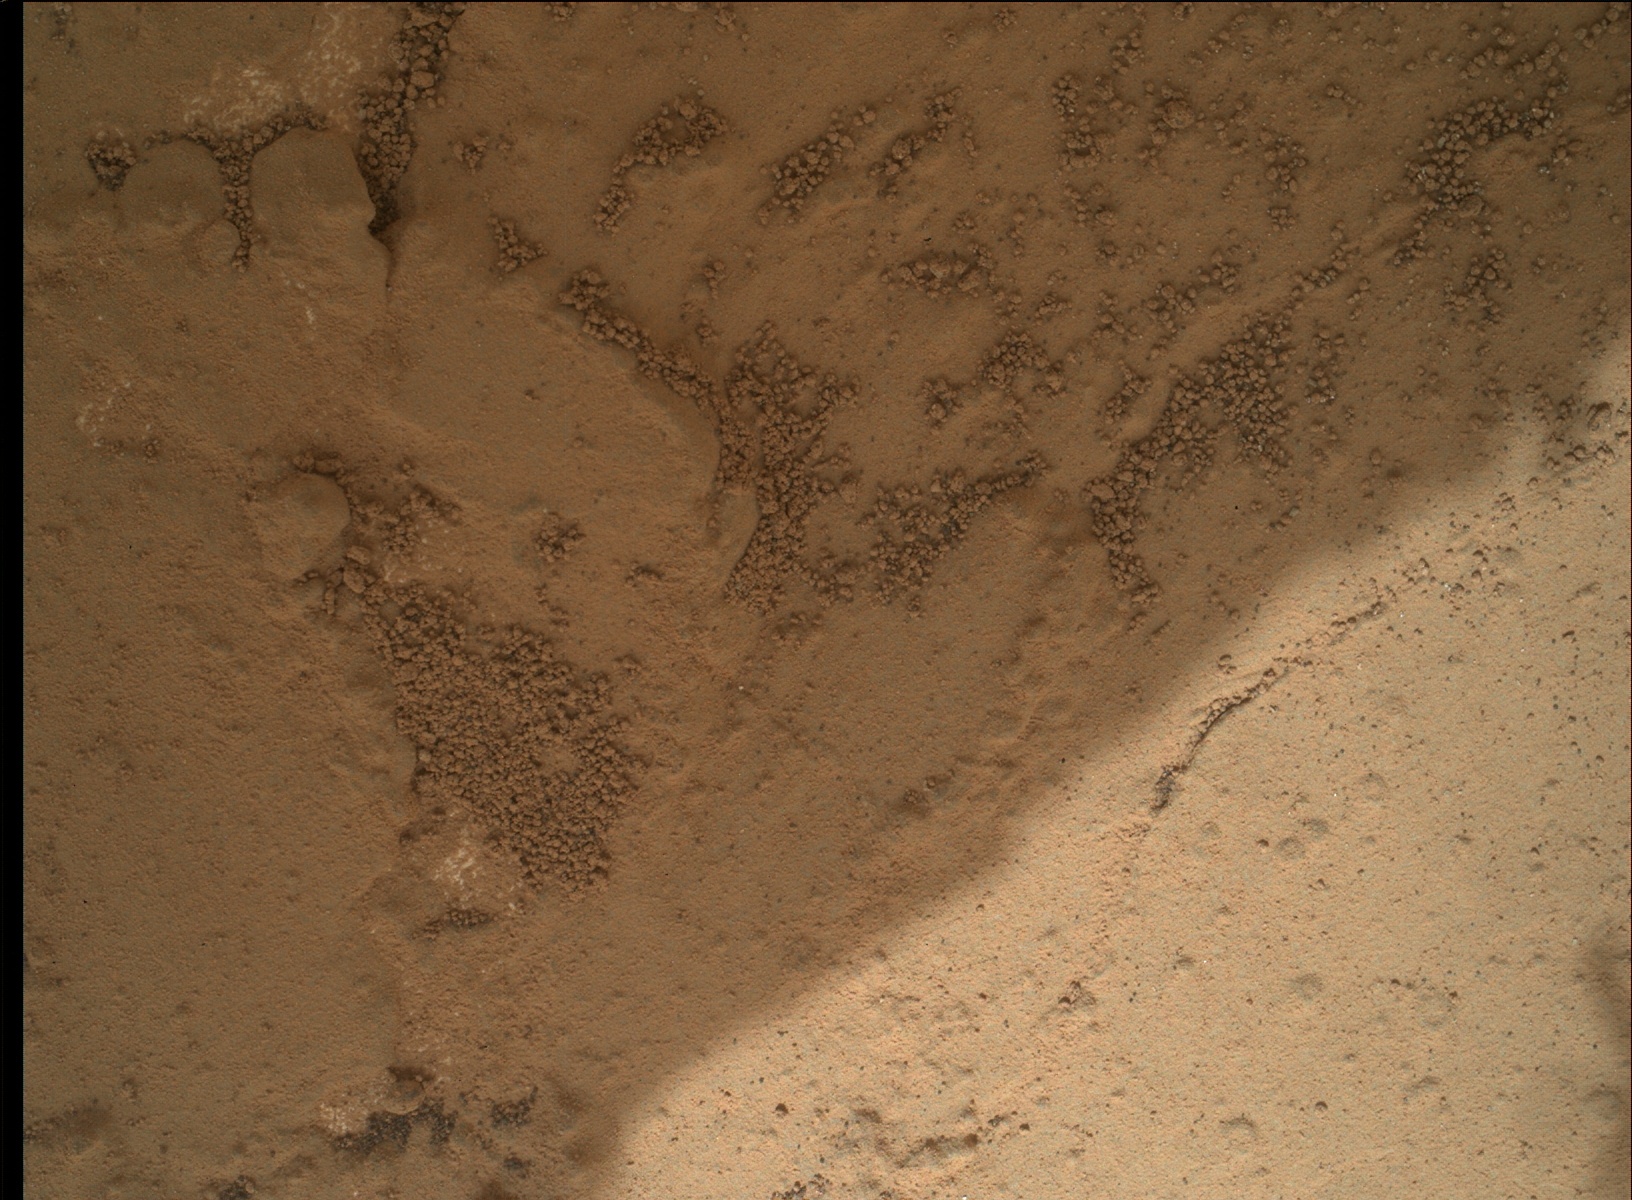 Nasa's Mars rover Curiosity acquired this image using its Mars Hand Lens Imager (MAHLI) on Sol 176